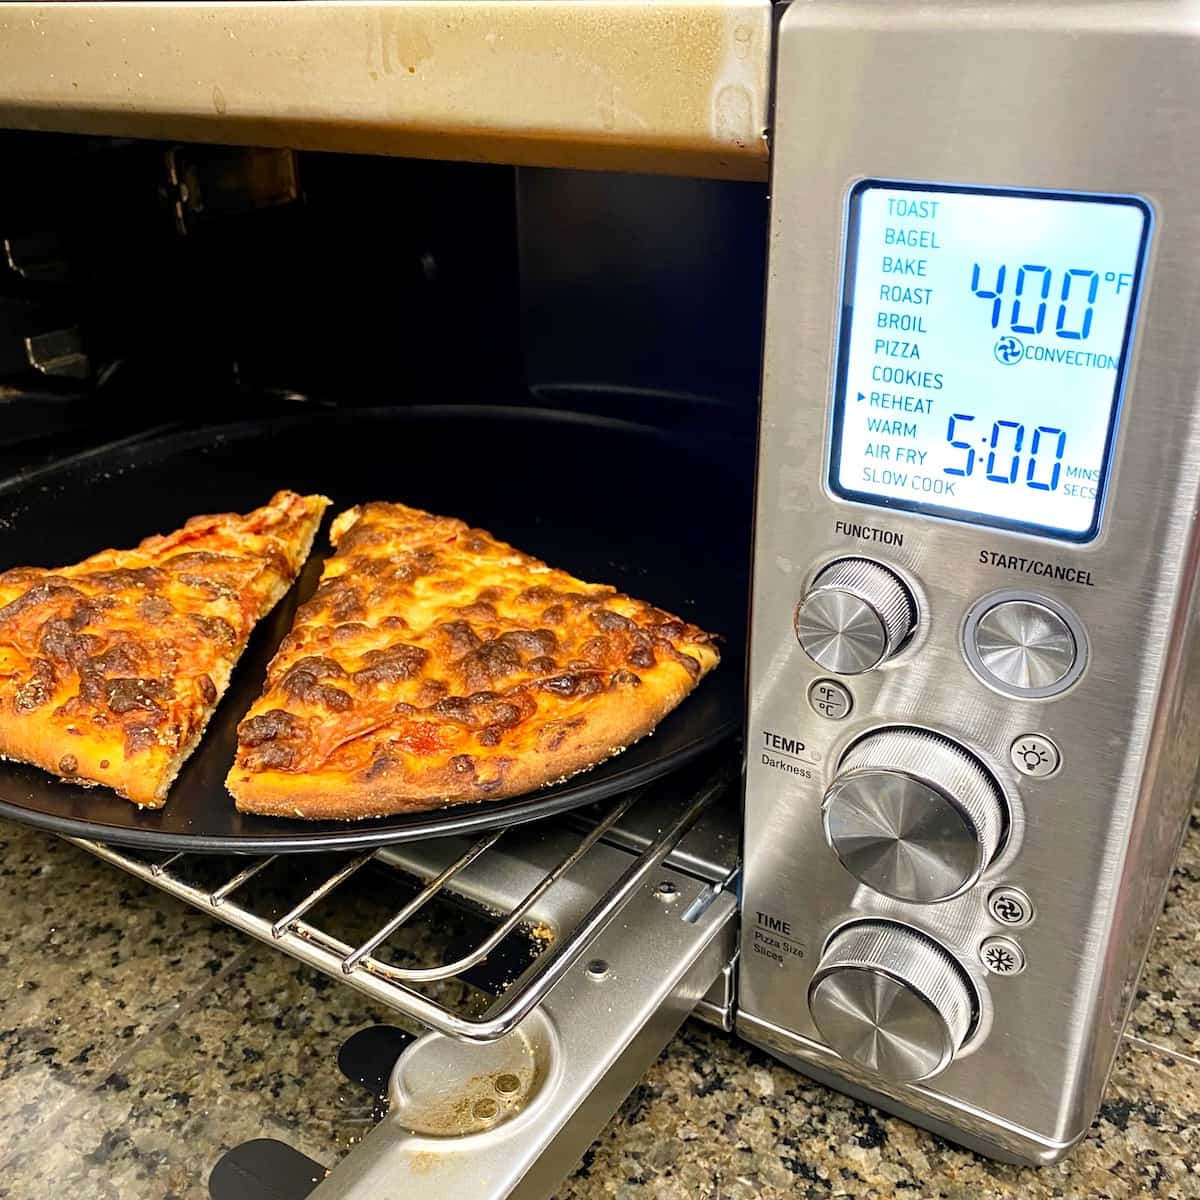 How To Warm Pizza In Toaster Oven